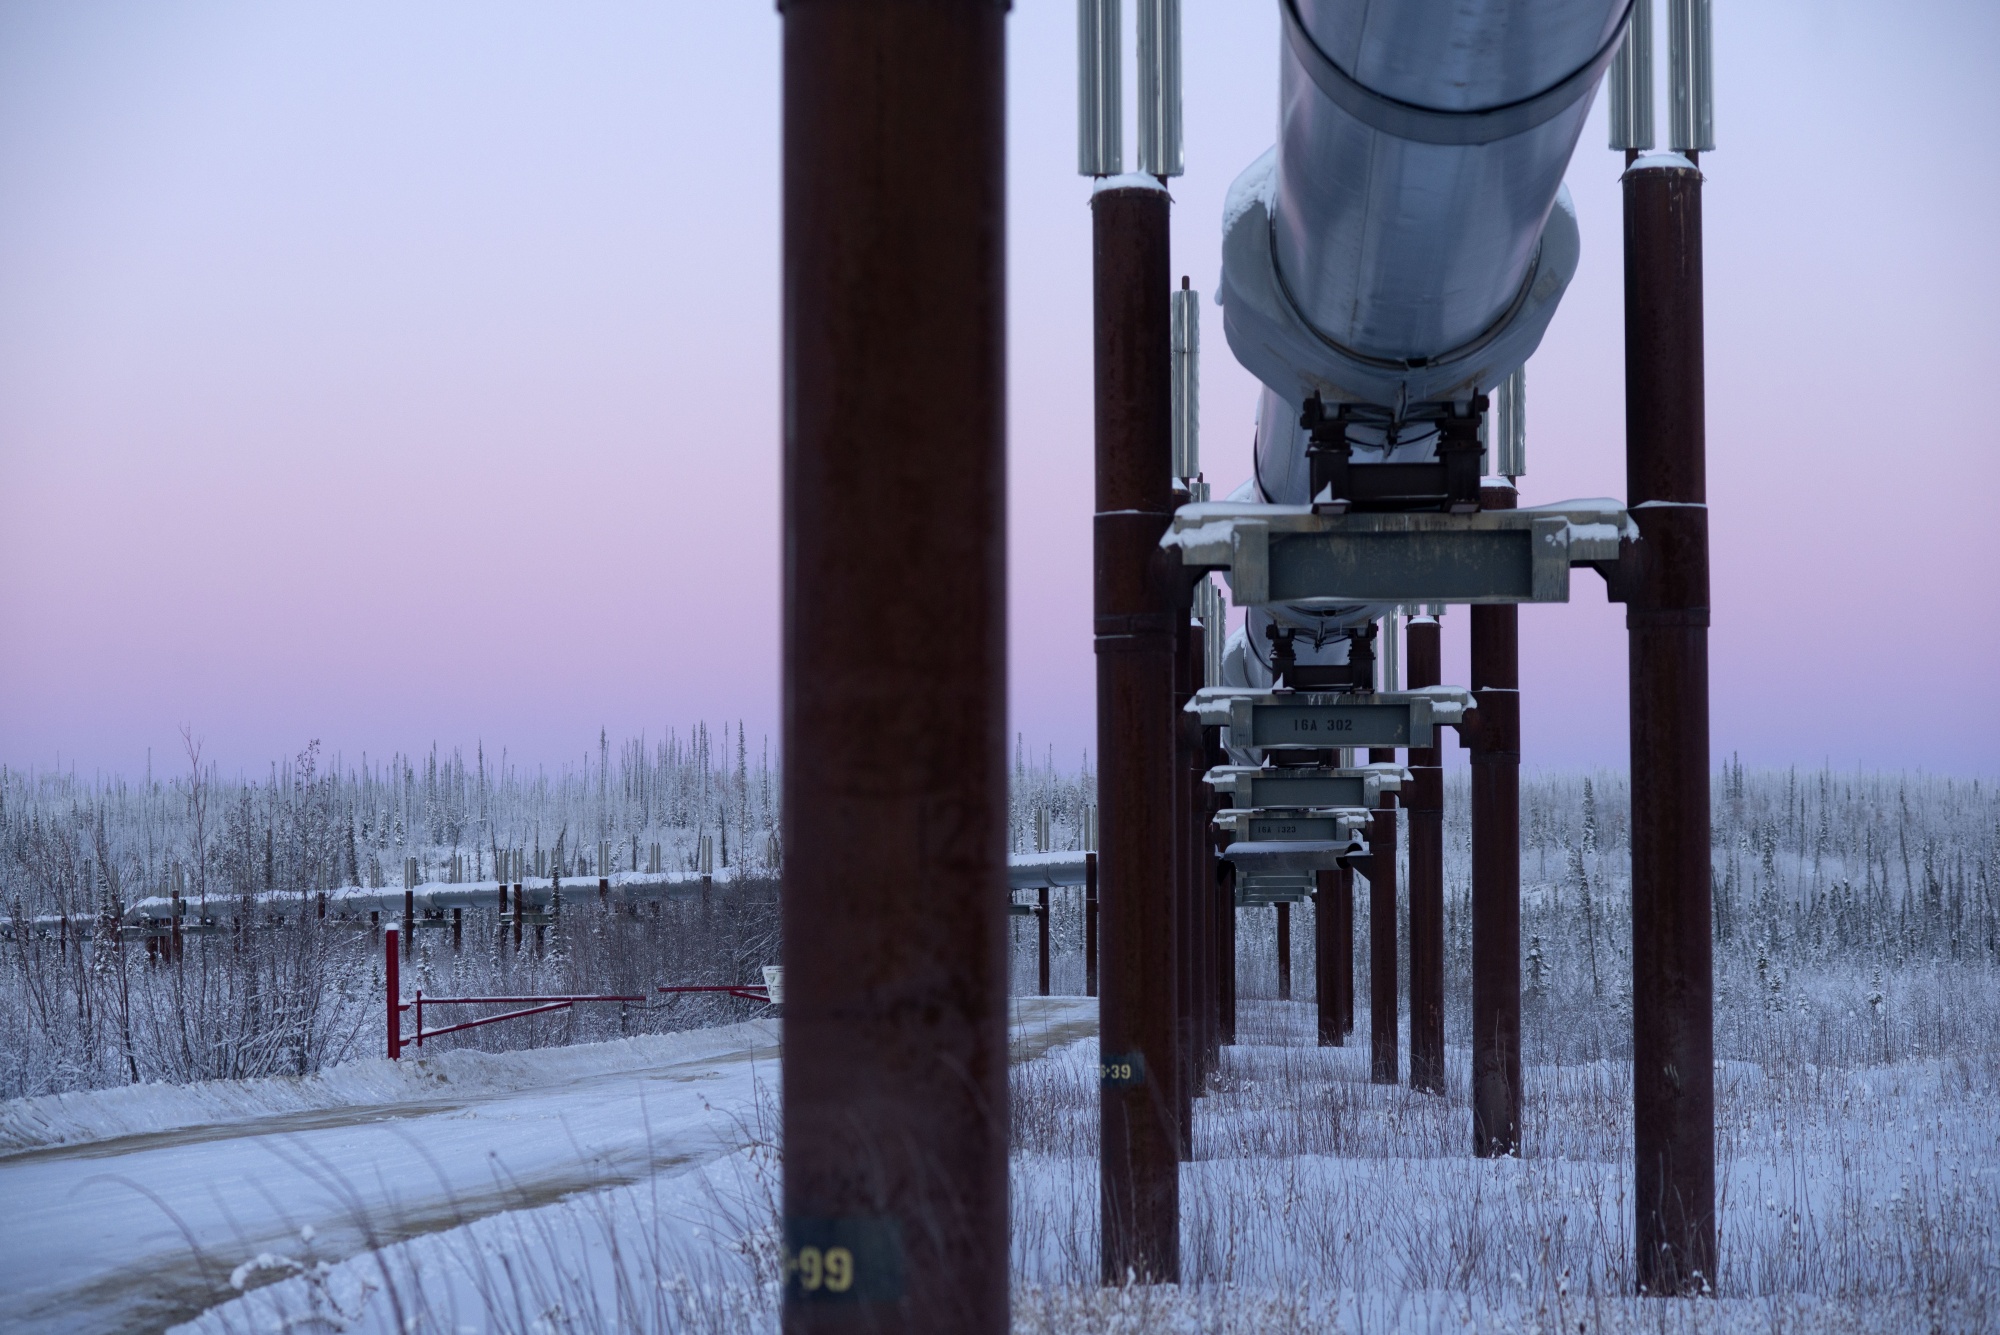 A section of the Trans-Alaska Pipeline inside the Arctic Circle, showing thermosyphons designed to keep underlying permafrost cold, in December 2016.